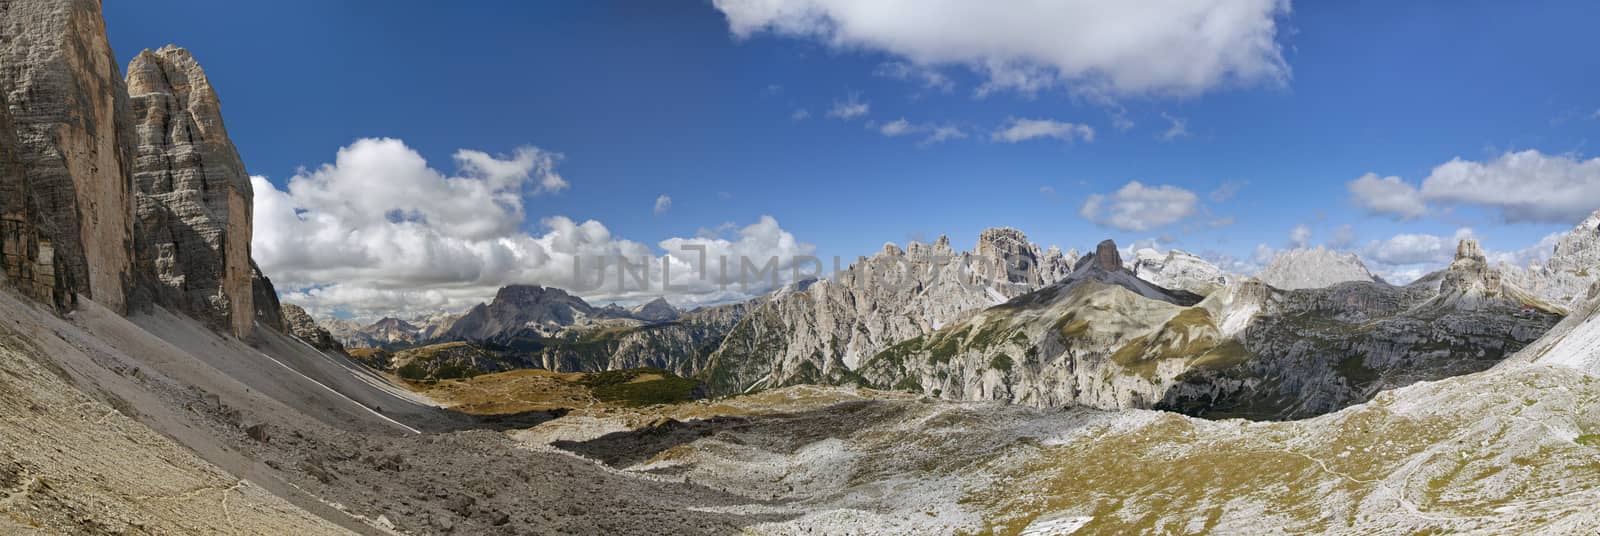 Dolomites mountains landscape by Goodday